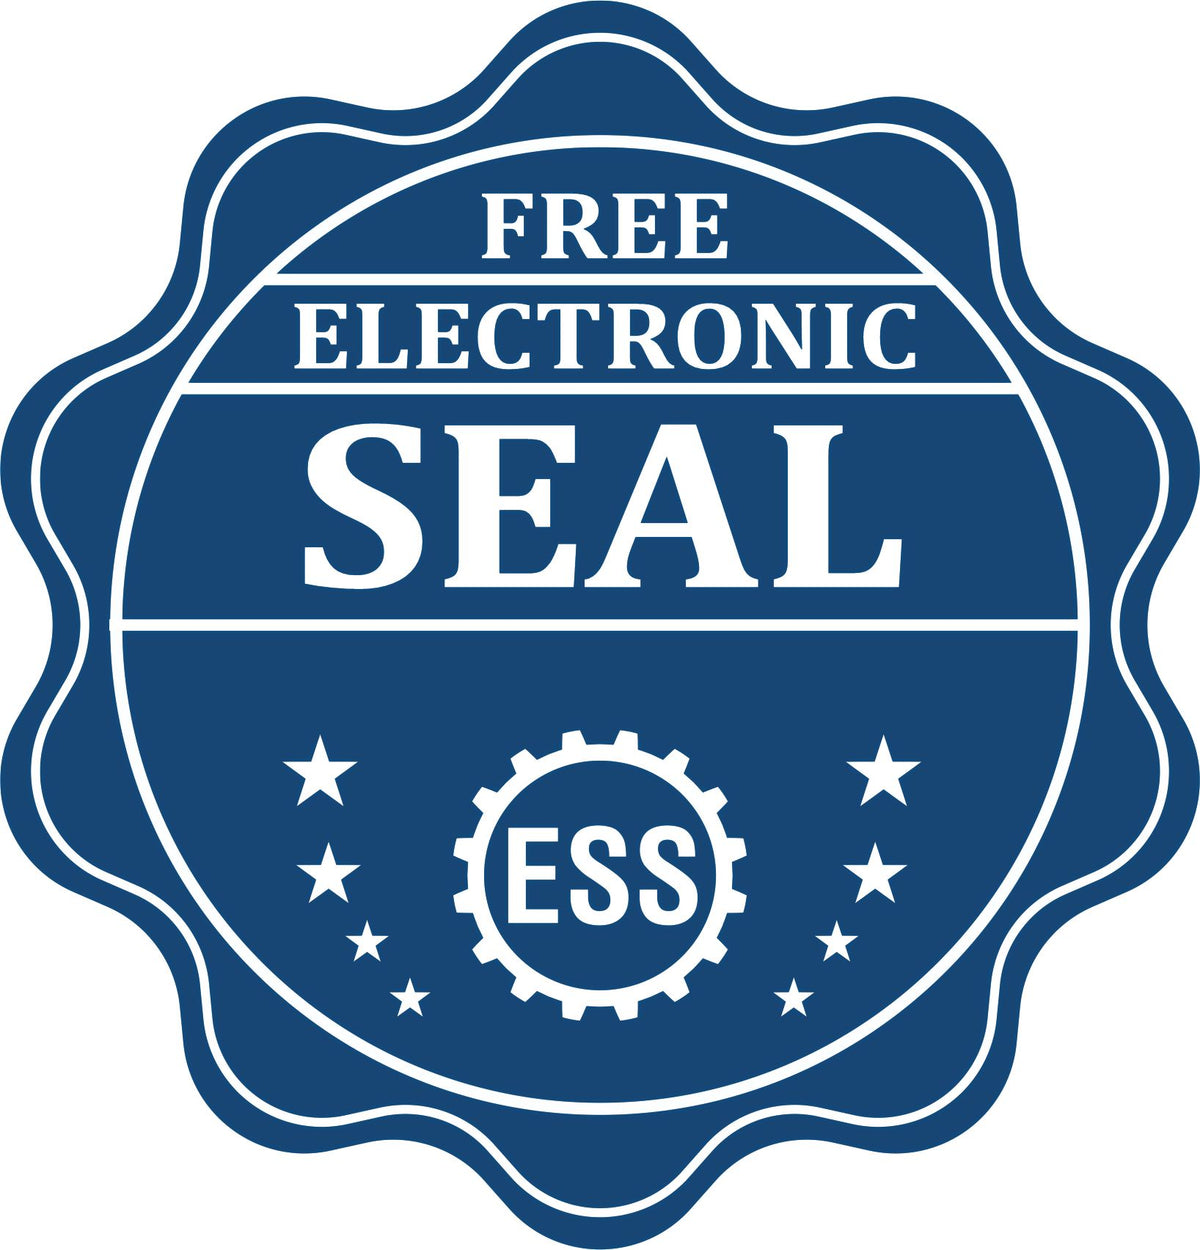 A badge showing a free electronic seal for the Heavy Duty Cast Iron Washington Architect Embosser with stars and the ESS gear on the emblem.